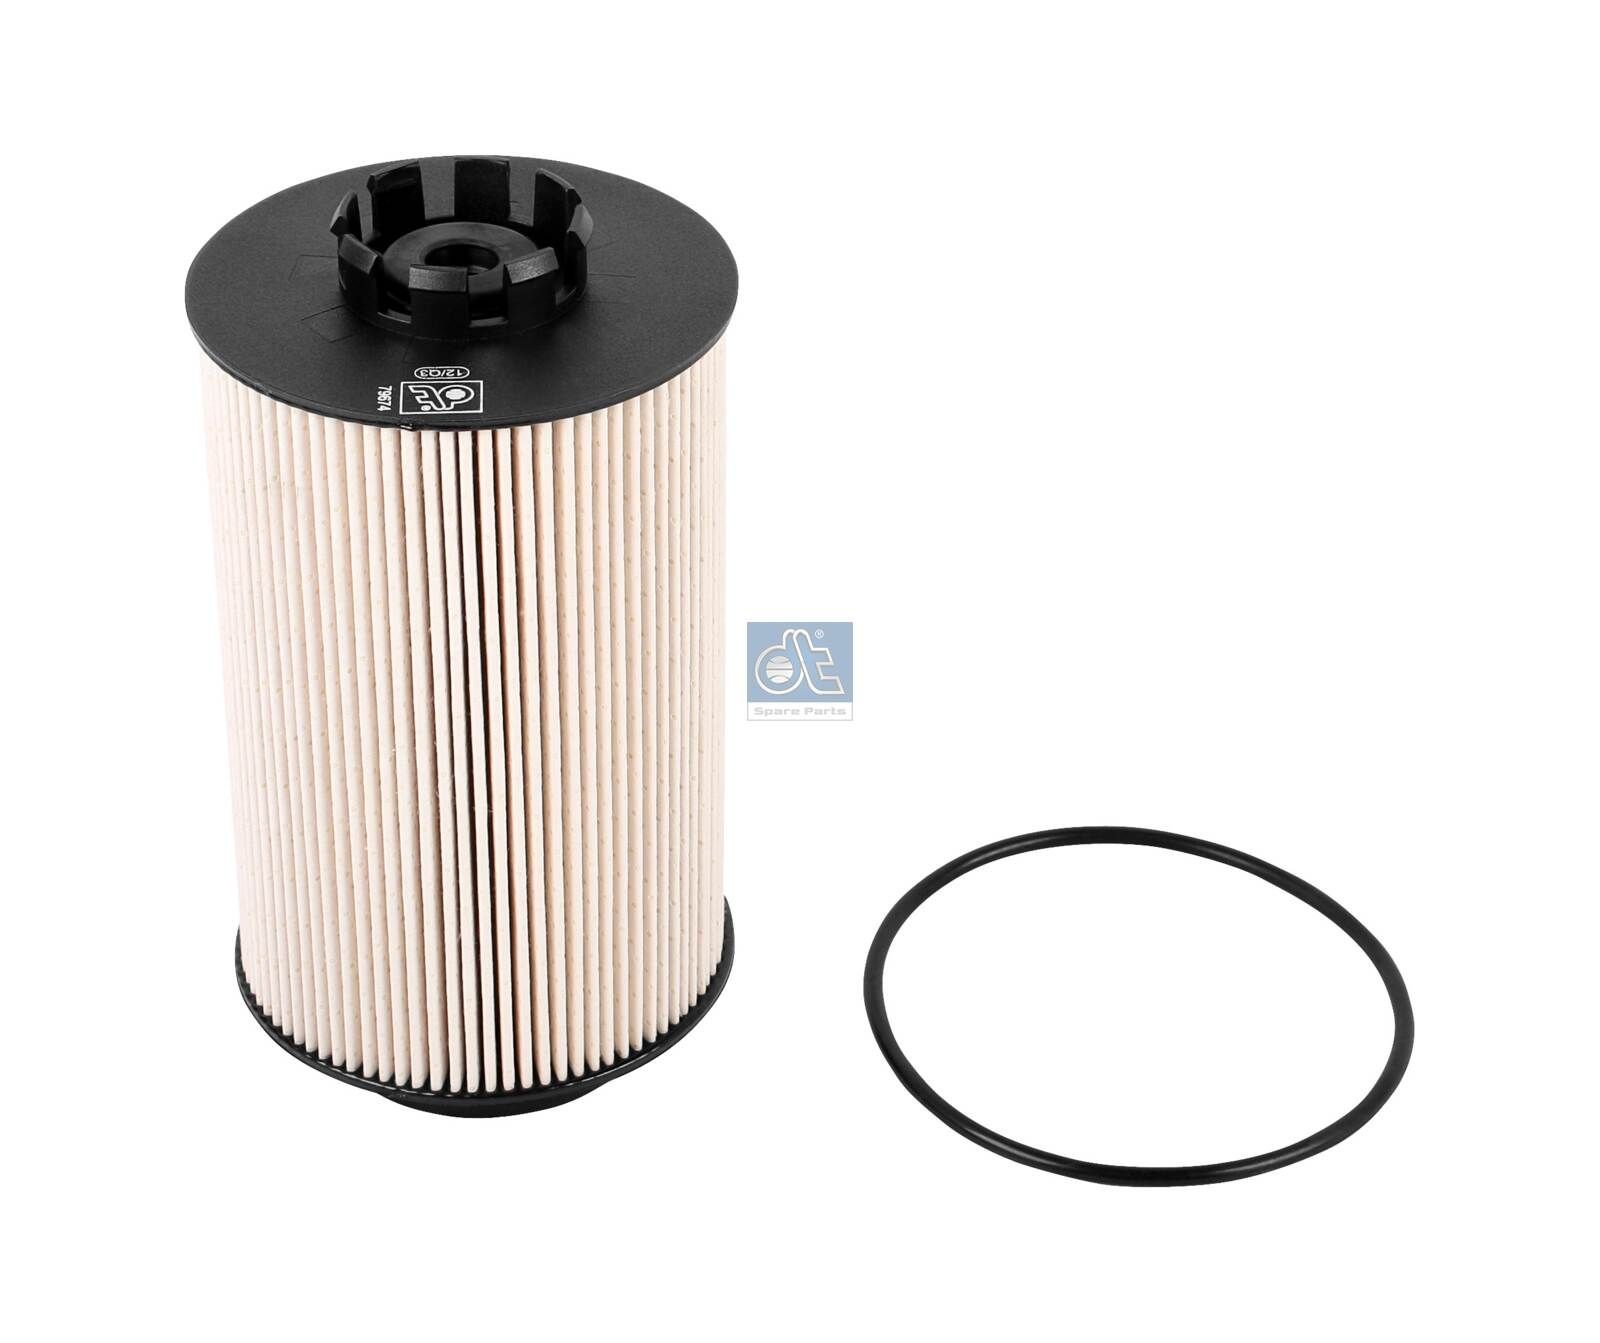 PU 1059 x DT Spare Parts 3.22009 Fuel filter 51 12503 0061